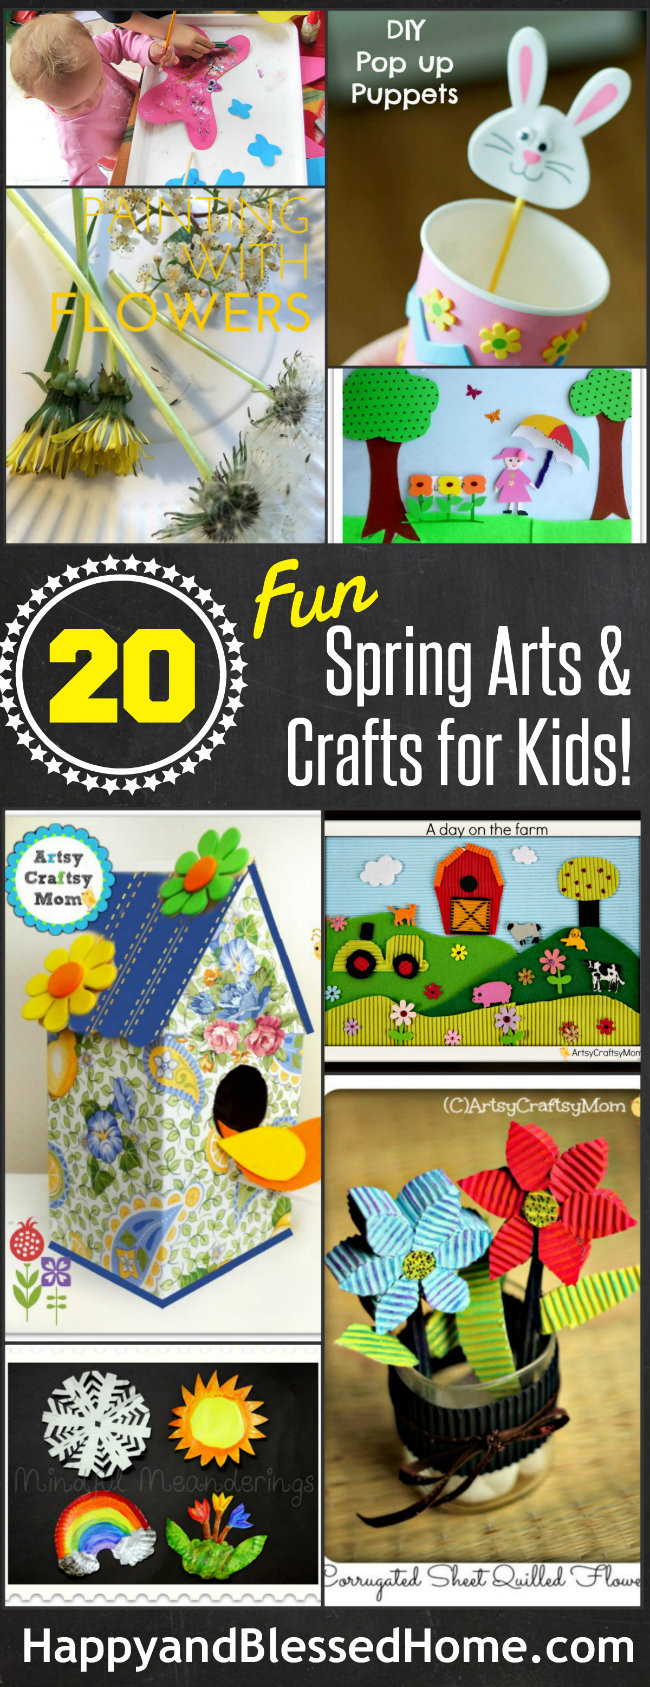 Arts And Craft Ideas For Toddlers
 The Ultimate List of 20 Spring Arts and Crafts for Kids